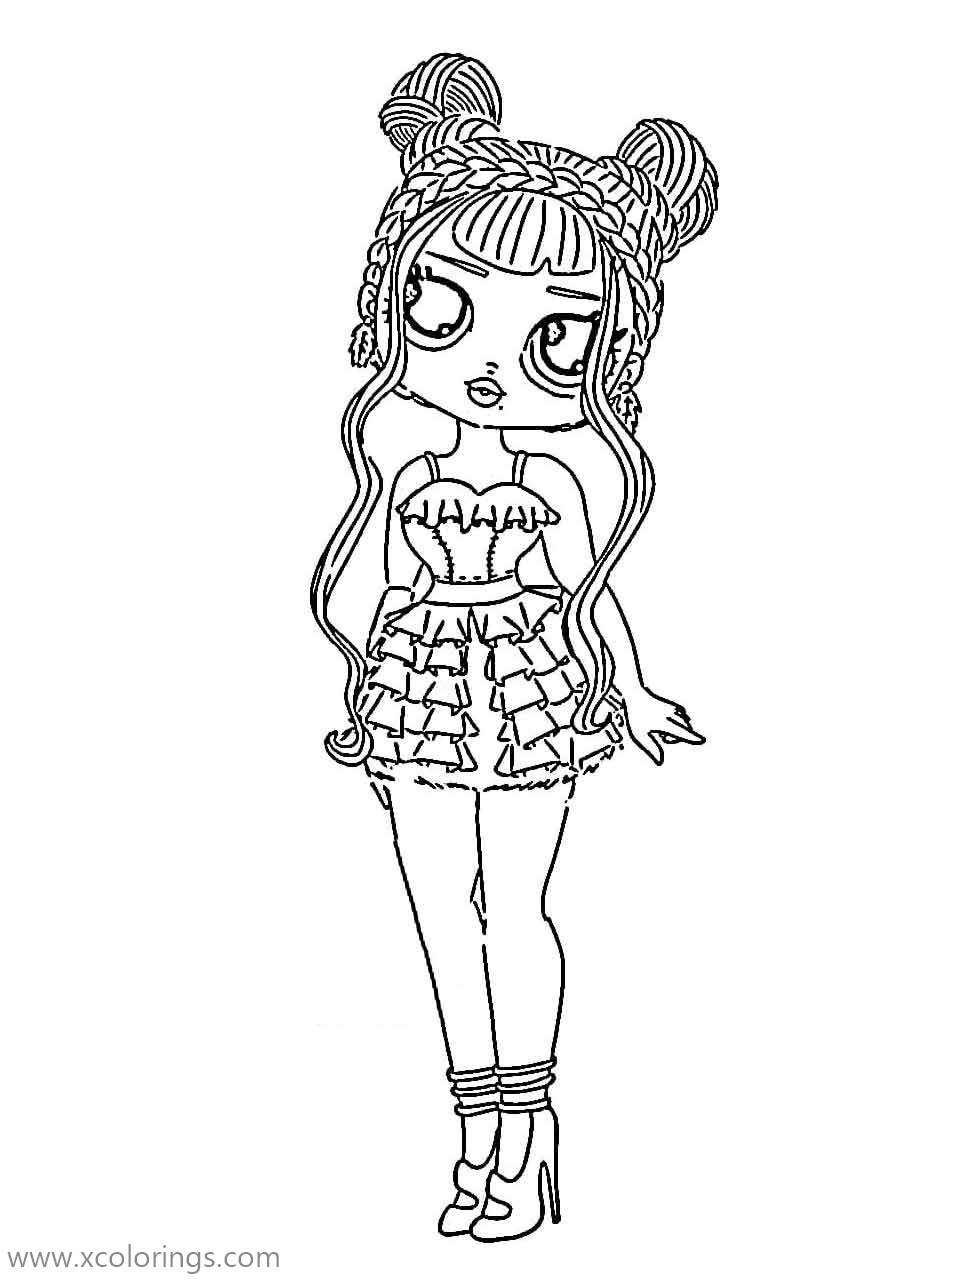 Free OMG Doll Coloring Pages from LOL Surprise Dolls printable